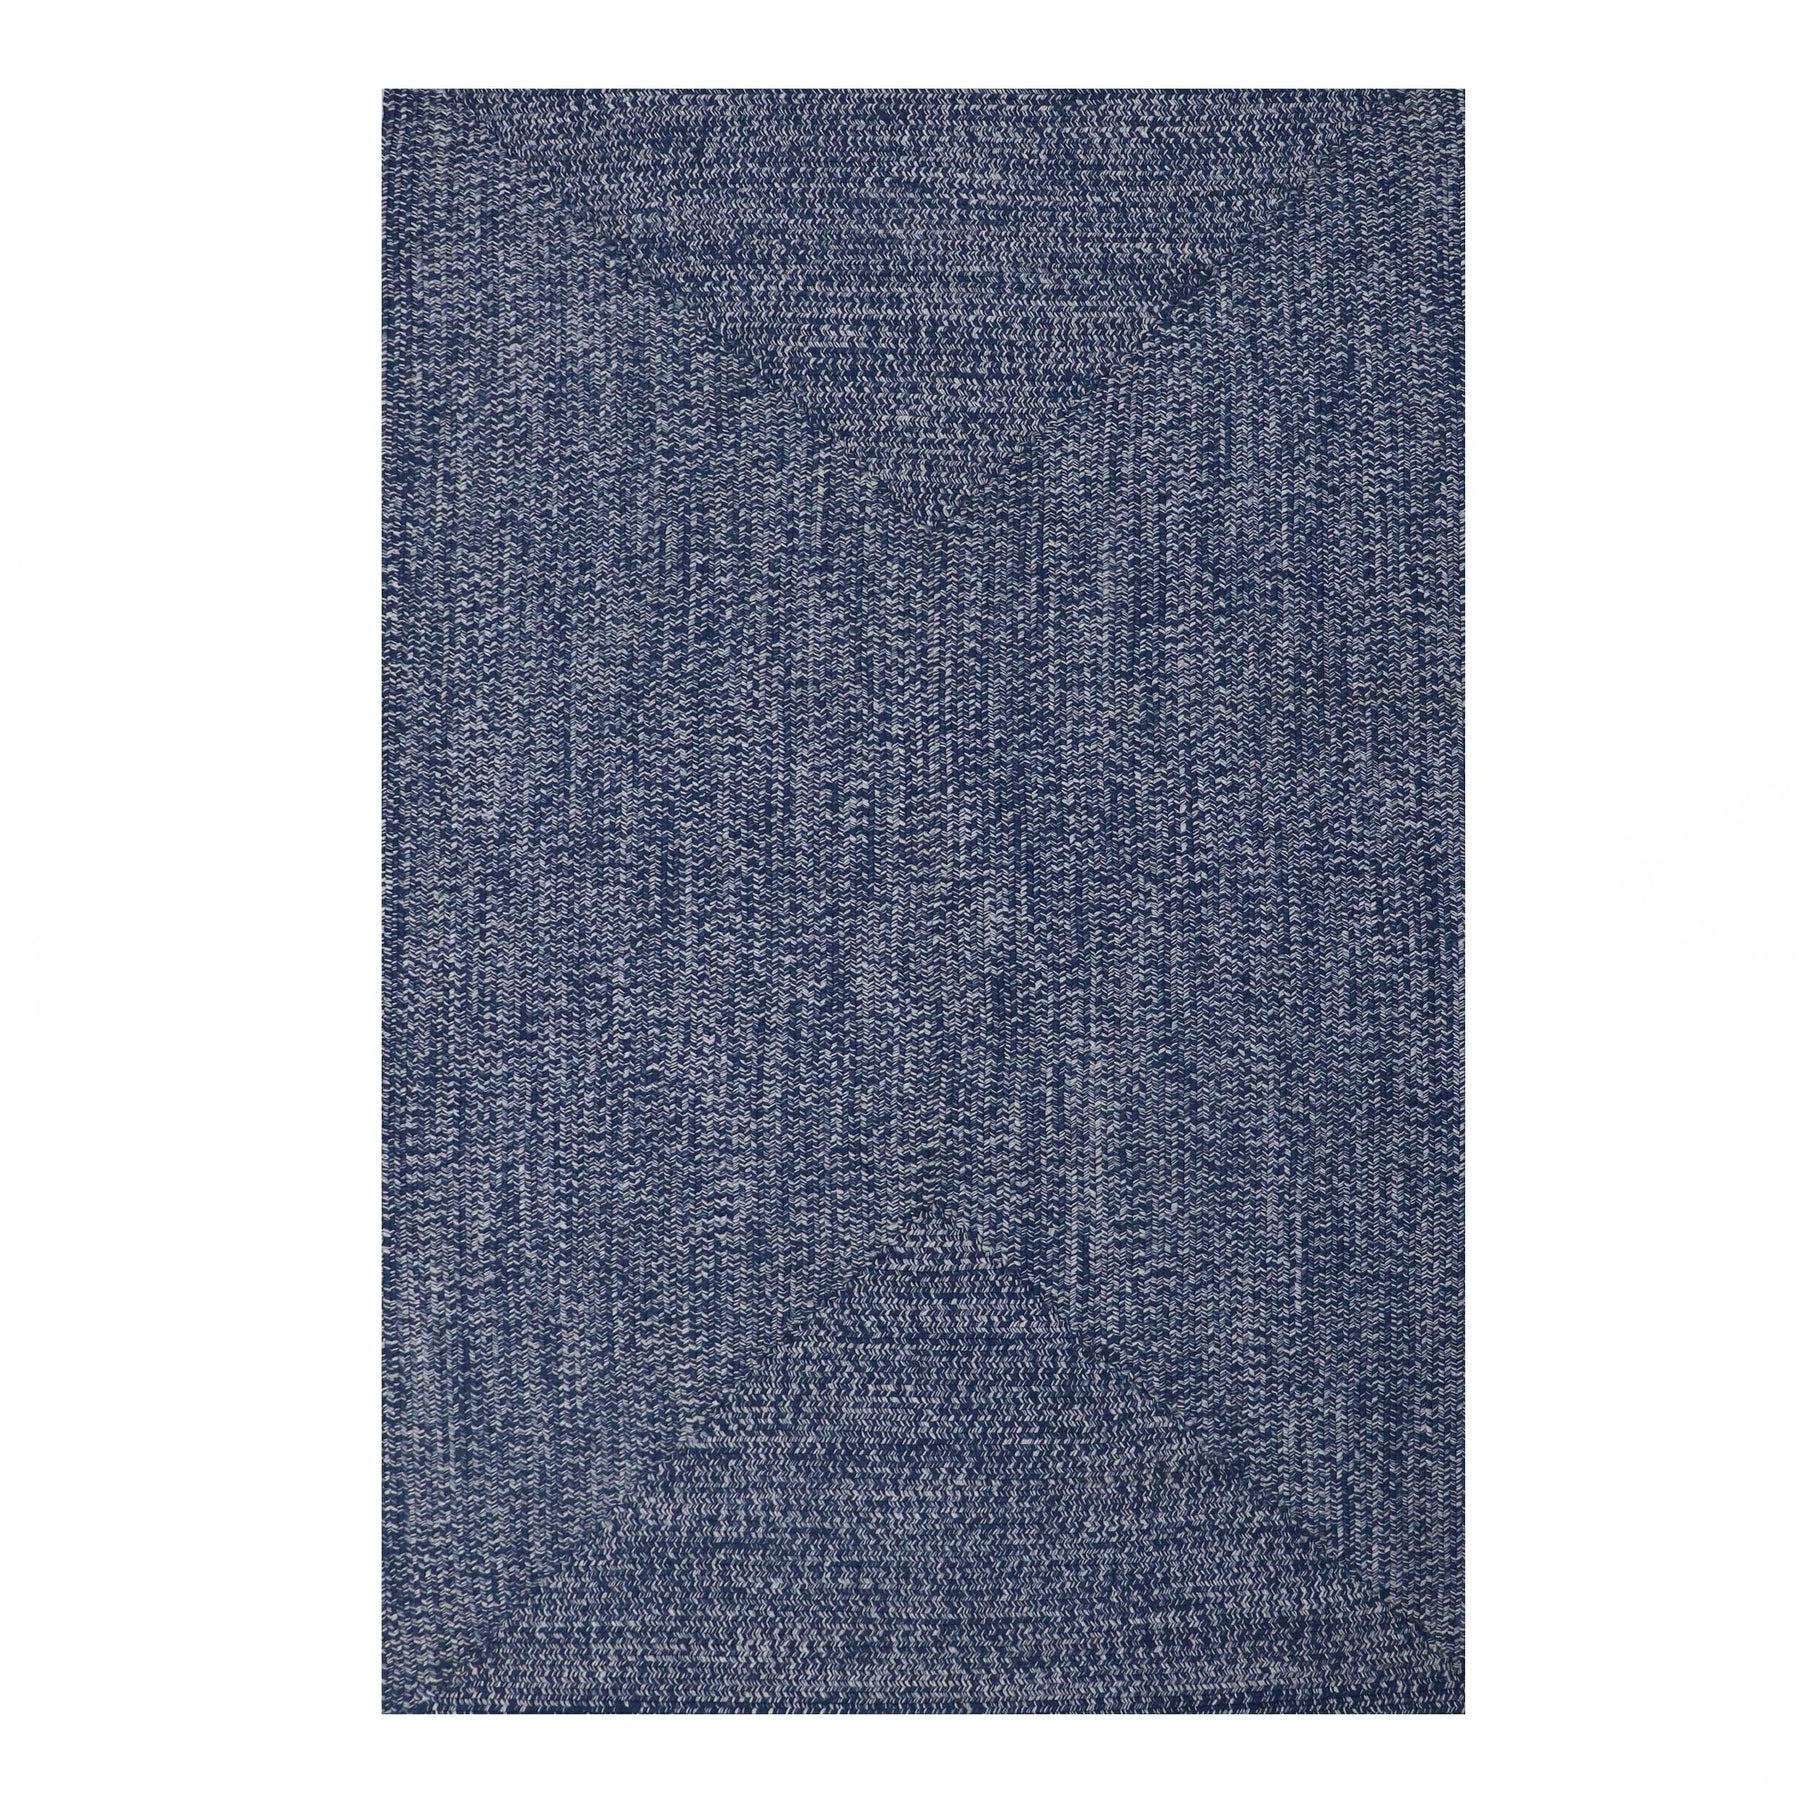 Superior Bohemian Multi-Toned Braided Patterned Indoor Outdoor Area Rug - Denim Blue-white